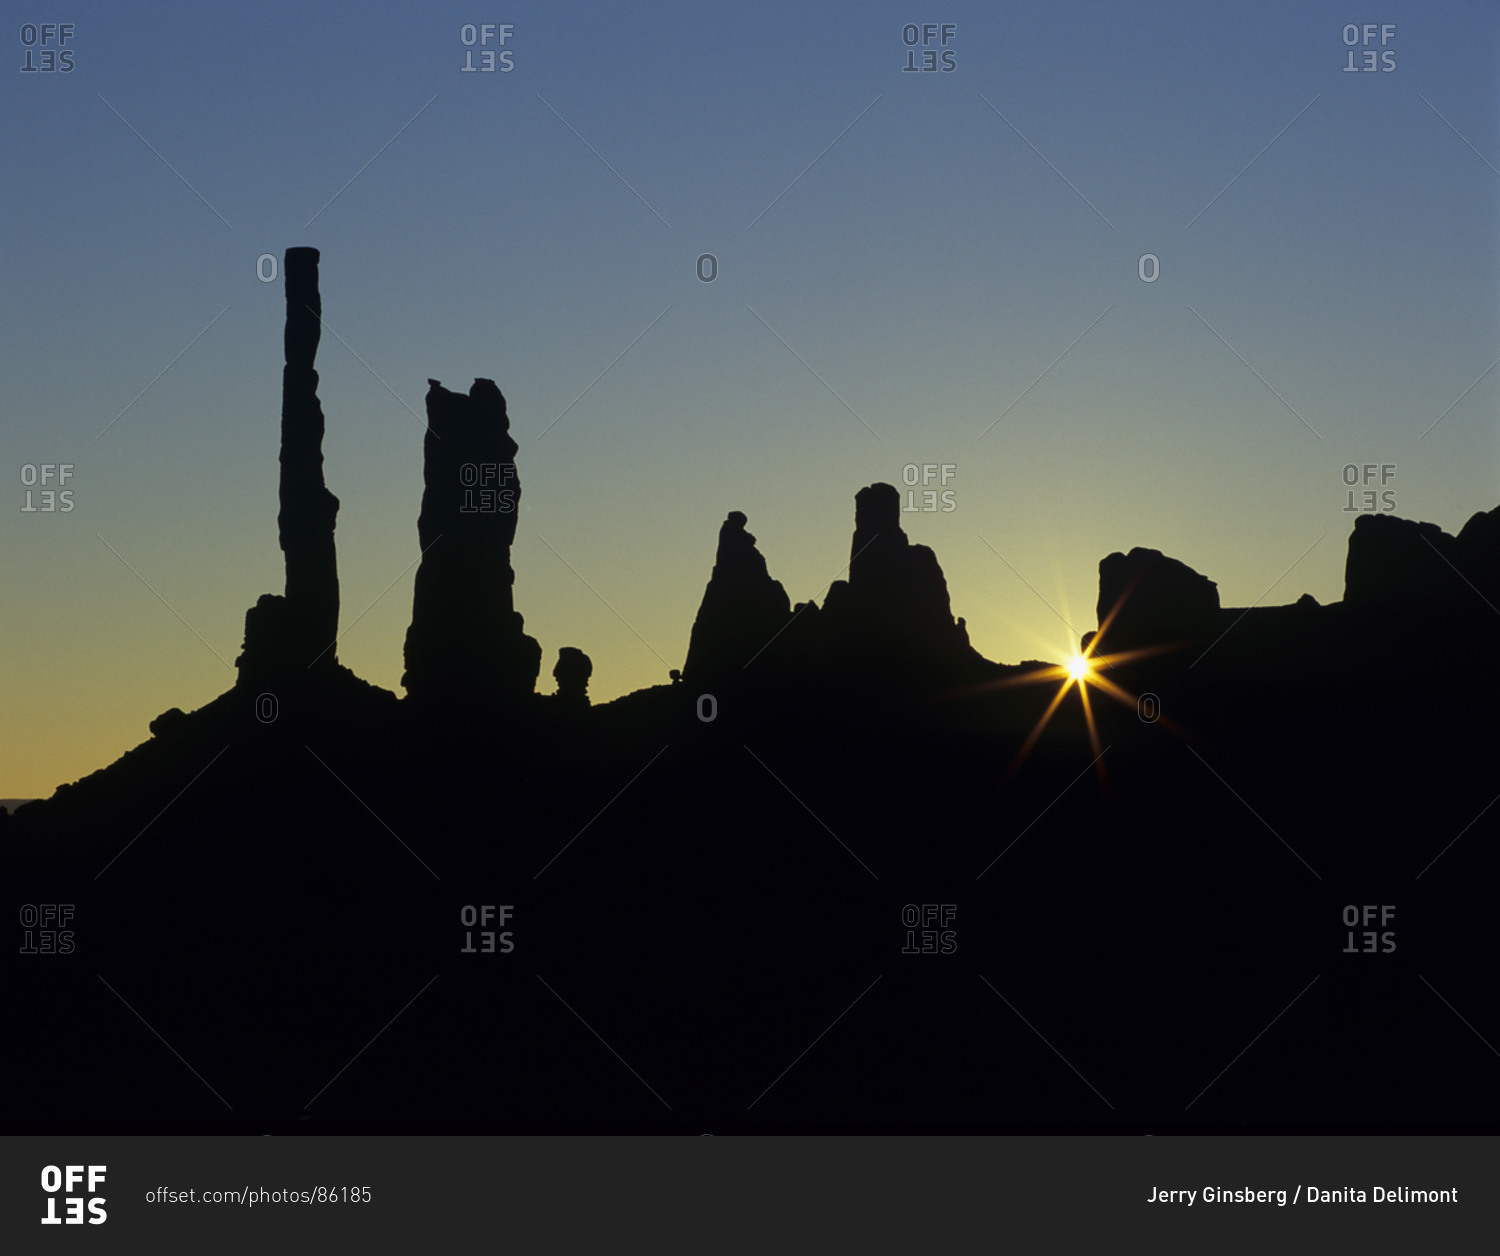 Distinctive and singular rock formations of Monument Valley in the Navajo Nation